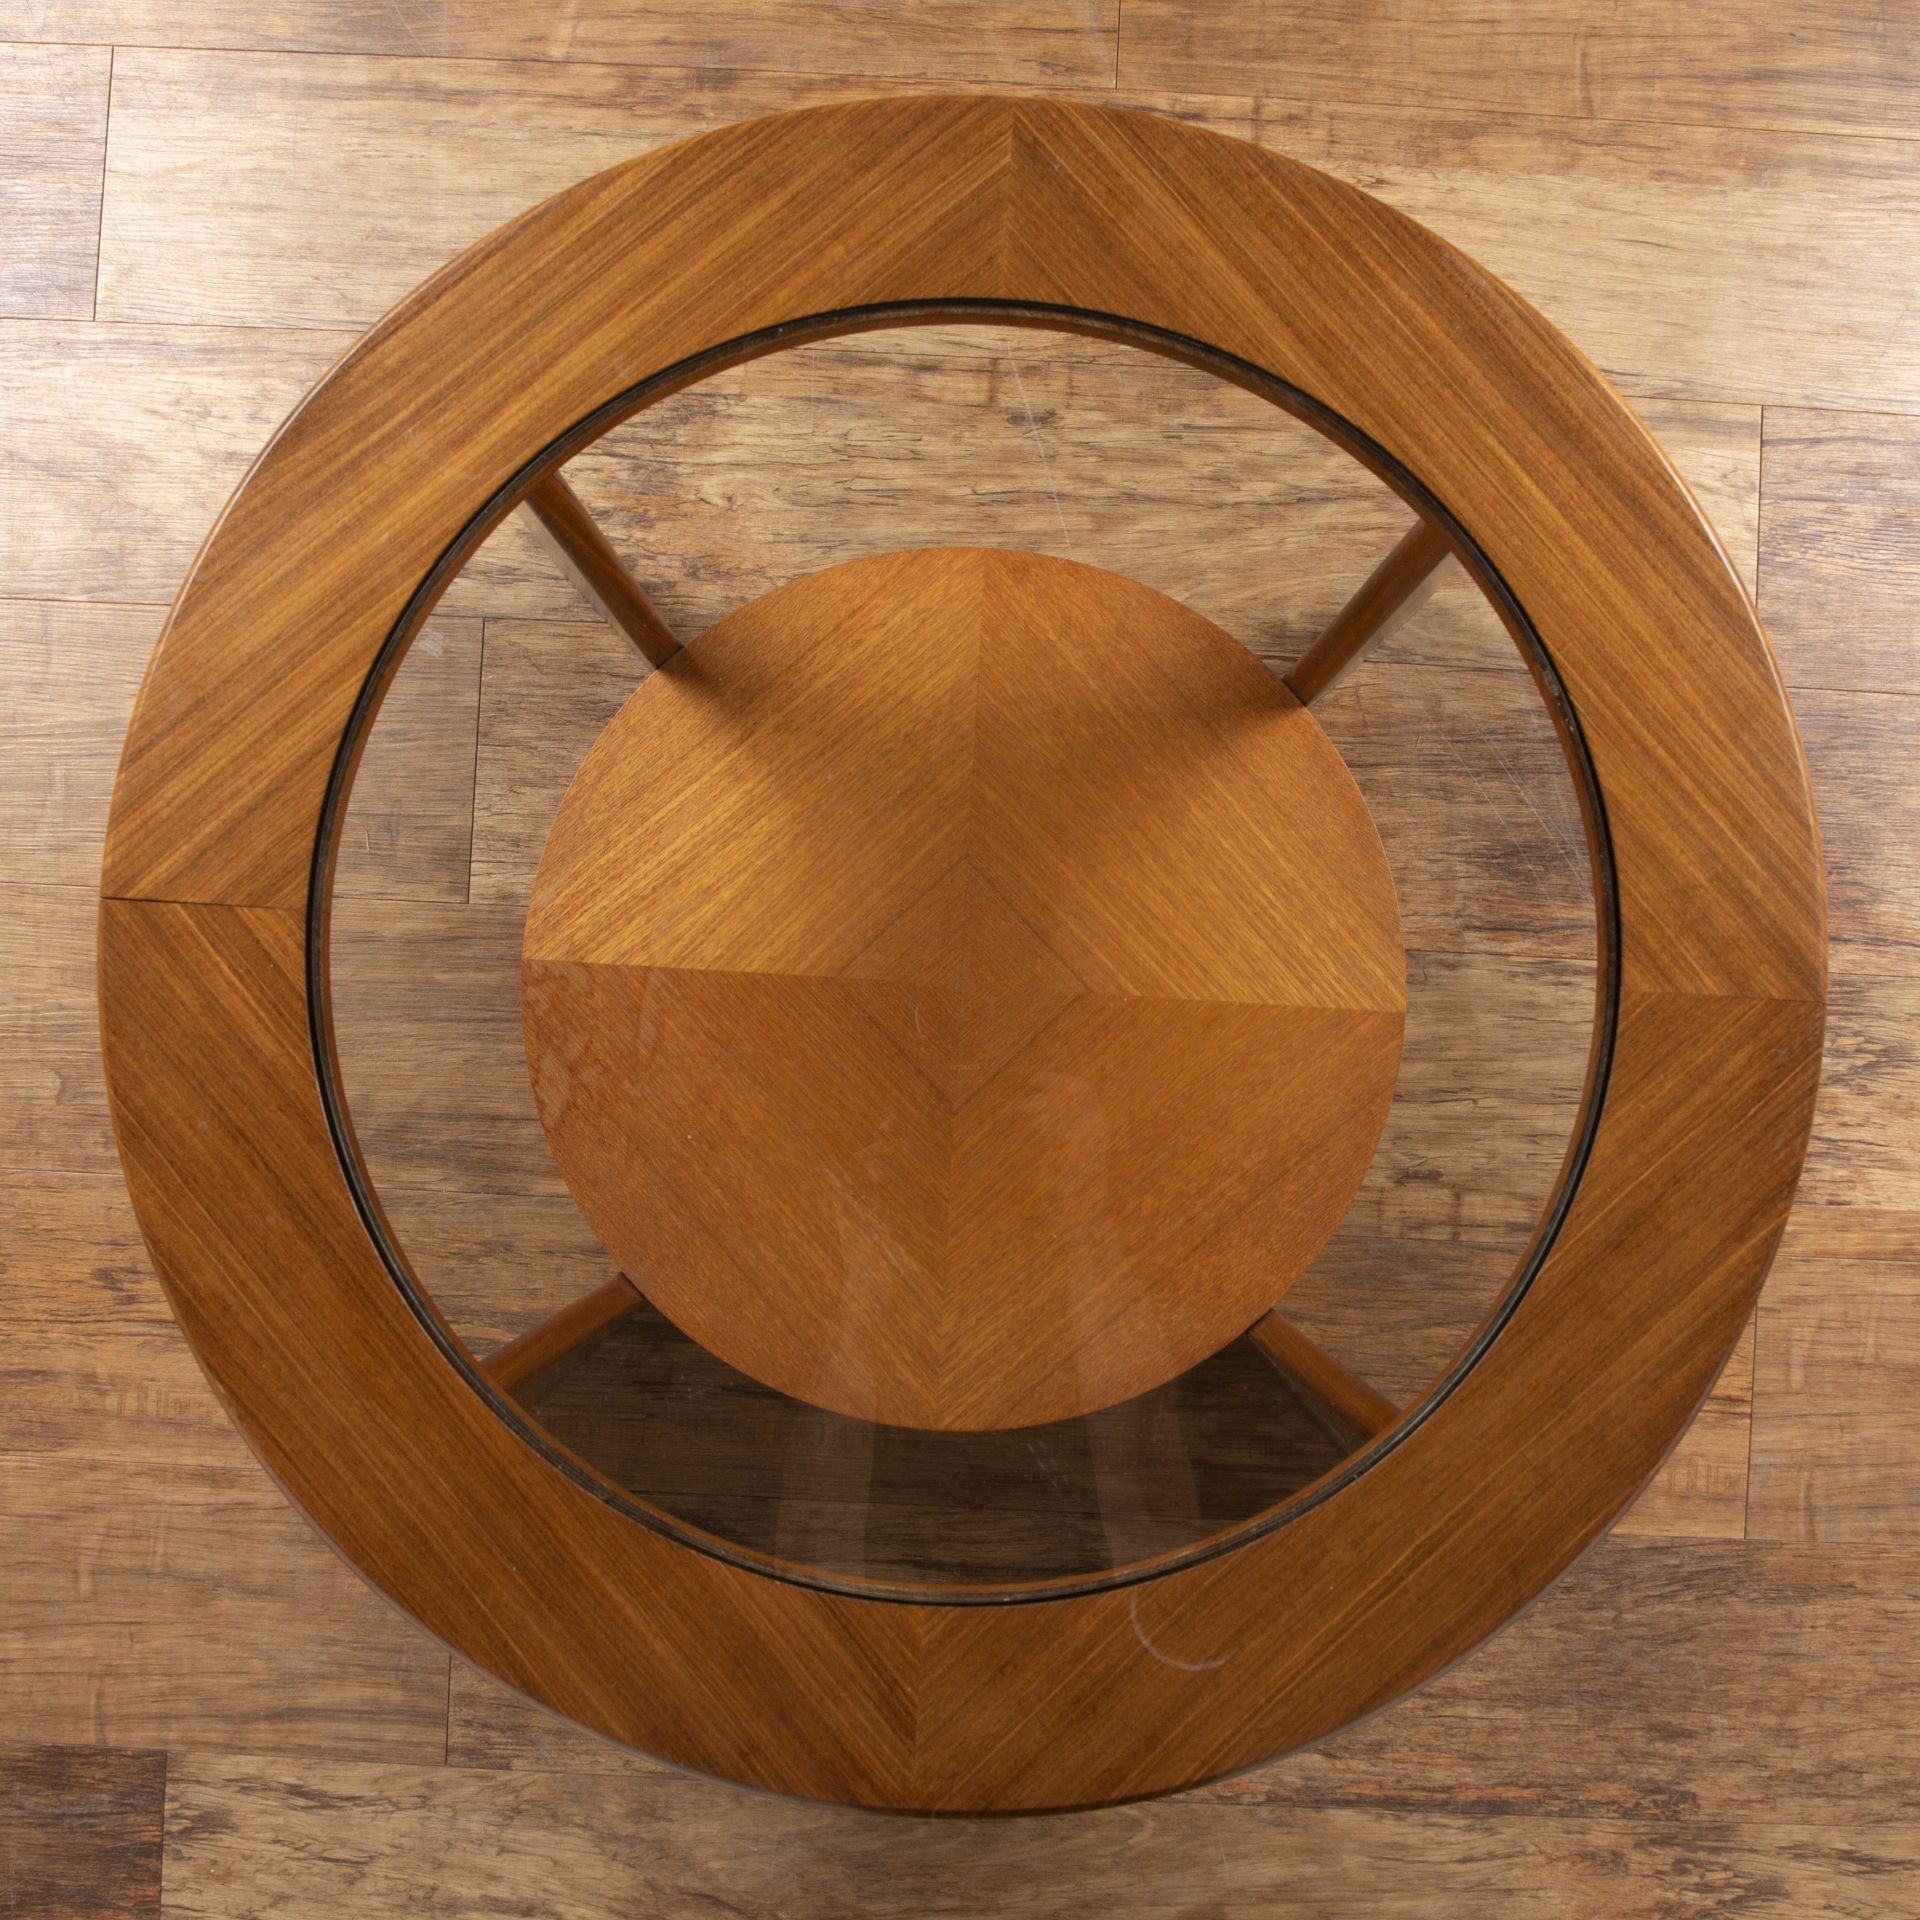 Attributed to G-plan teak, circular coffee table with glass inset top, unmarked, 77.5cm wide x - Image 5 of 5